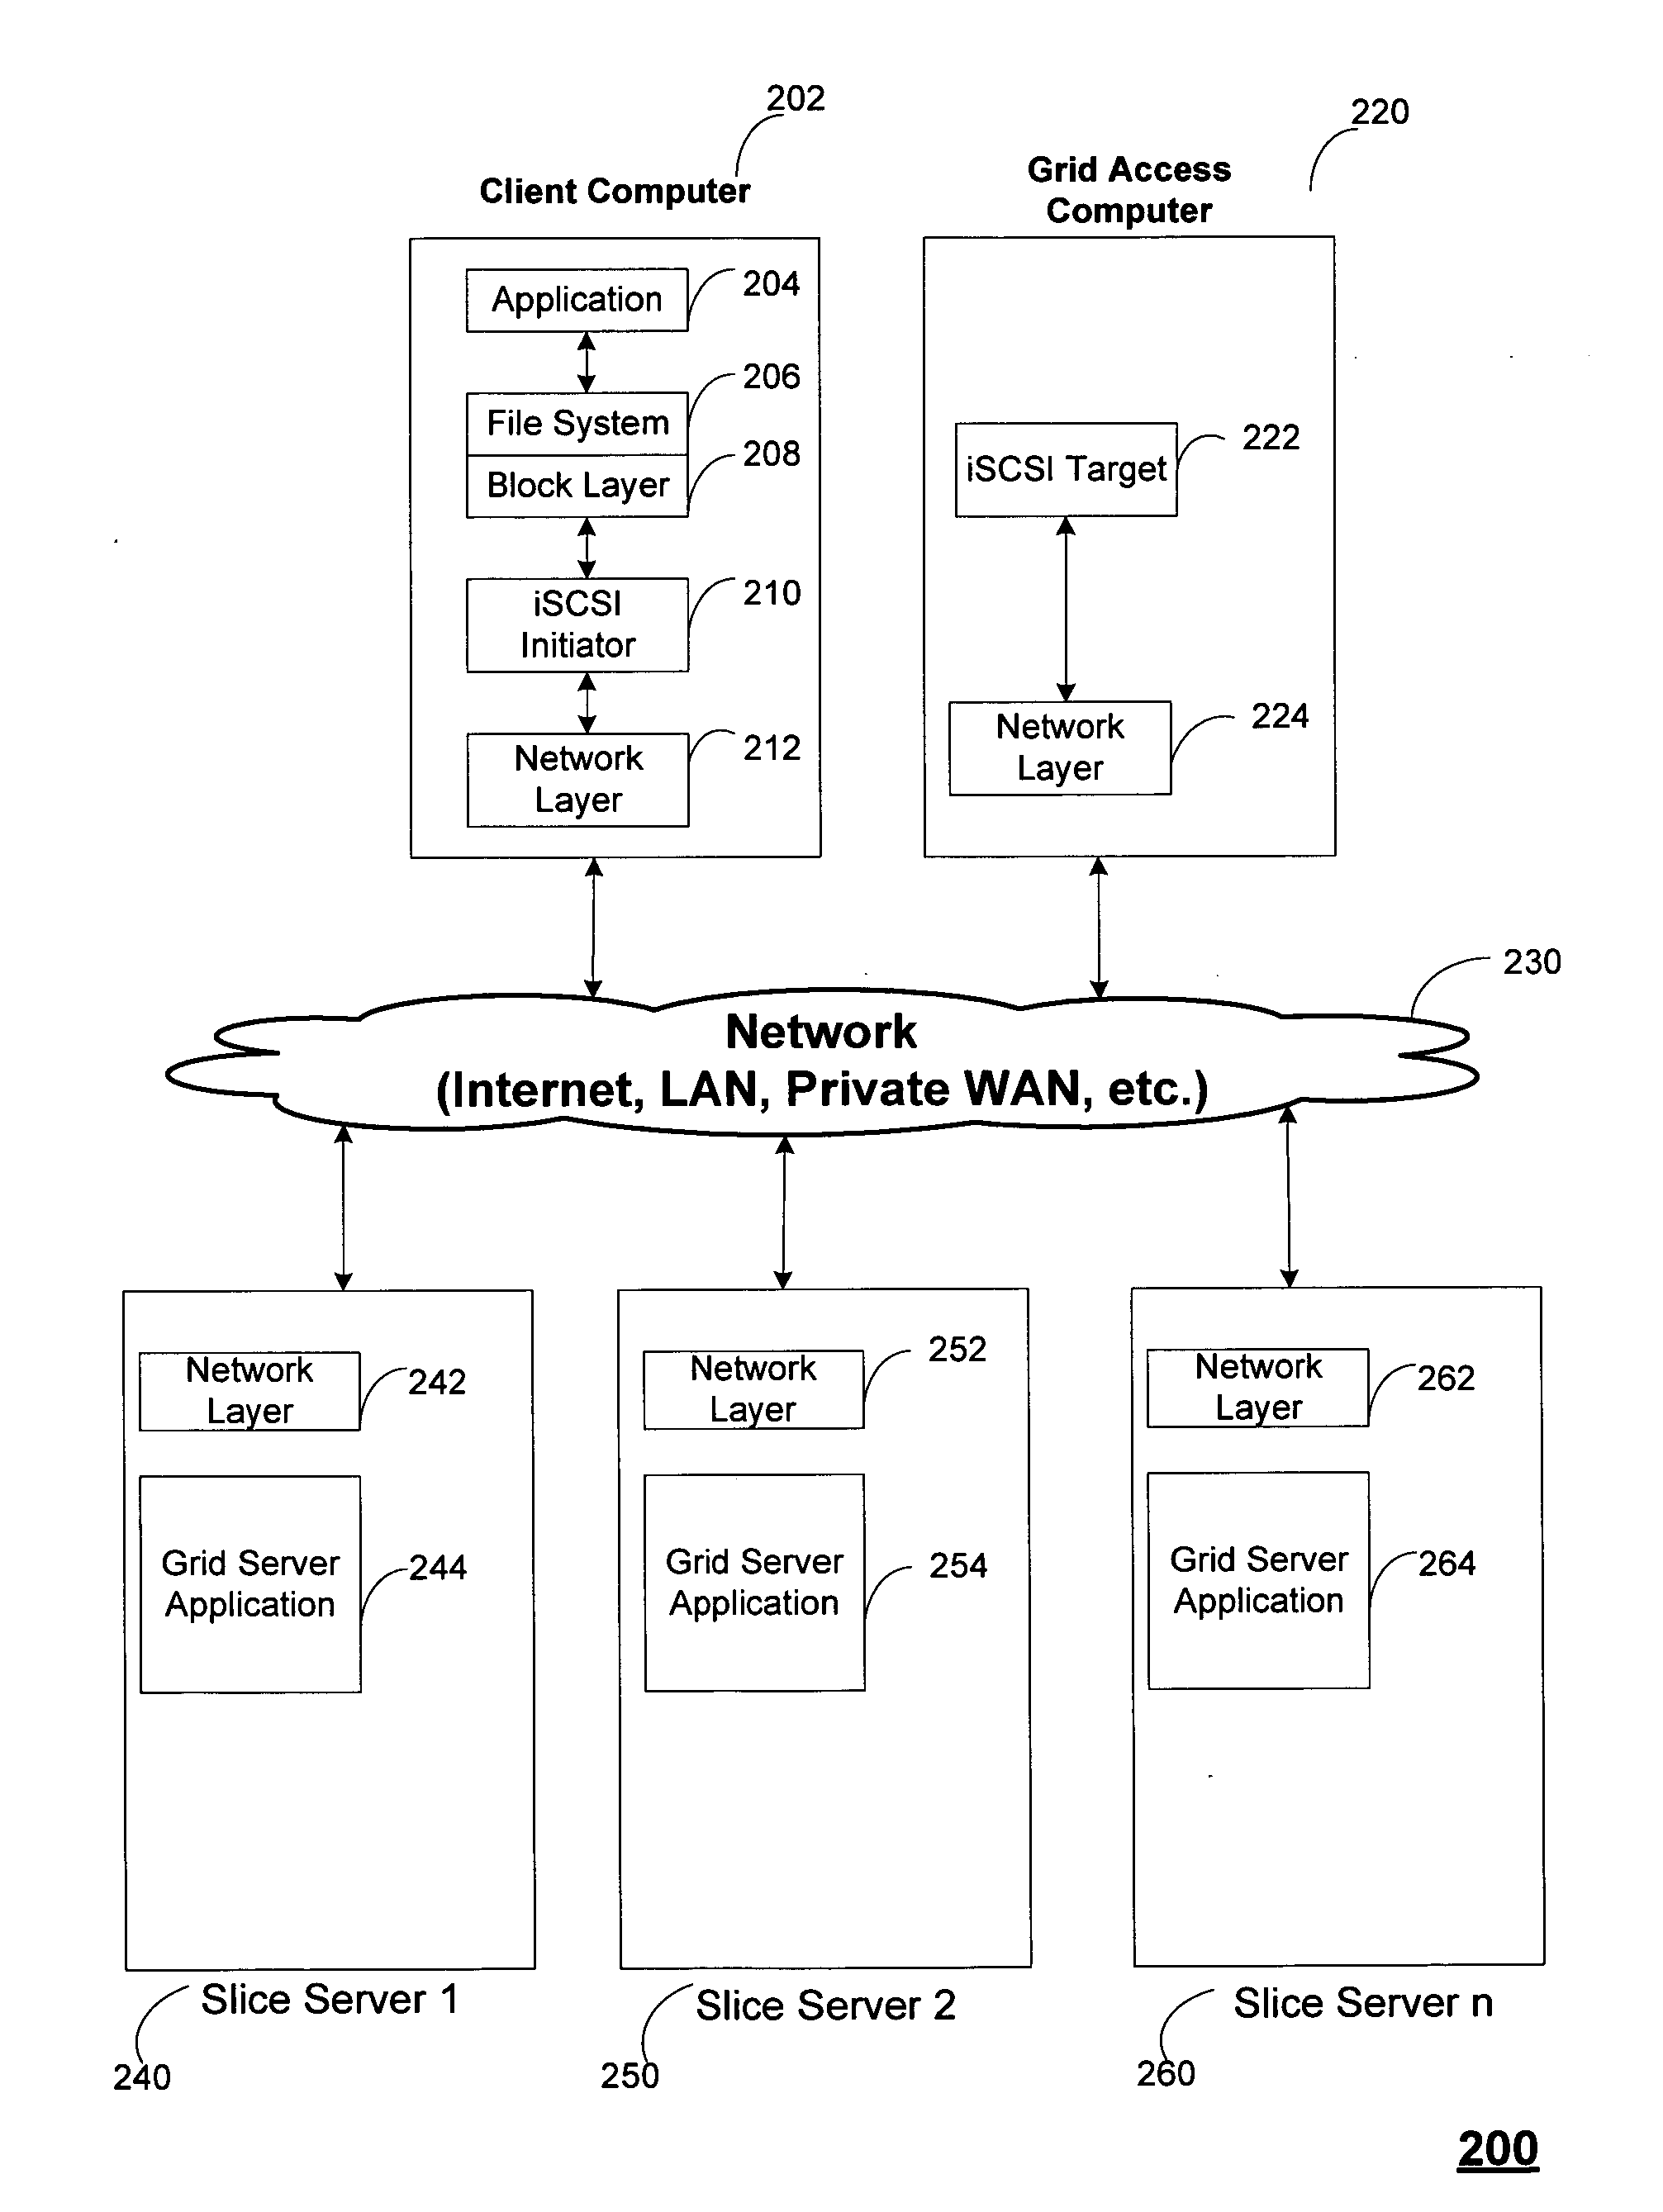 Block based access to a dispersed data storage network